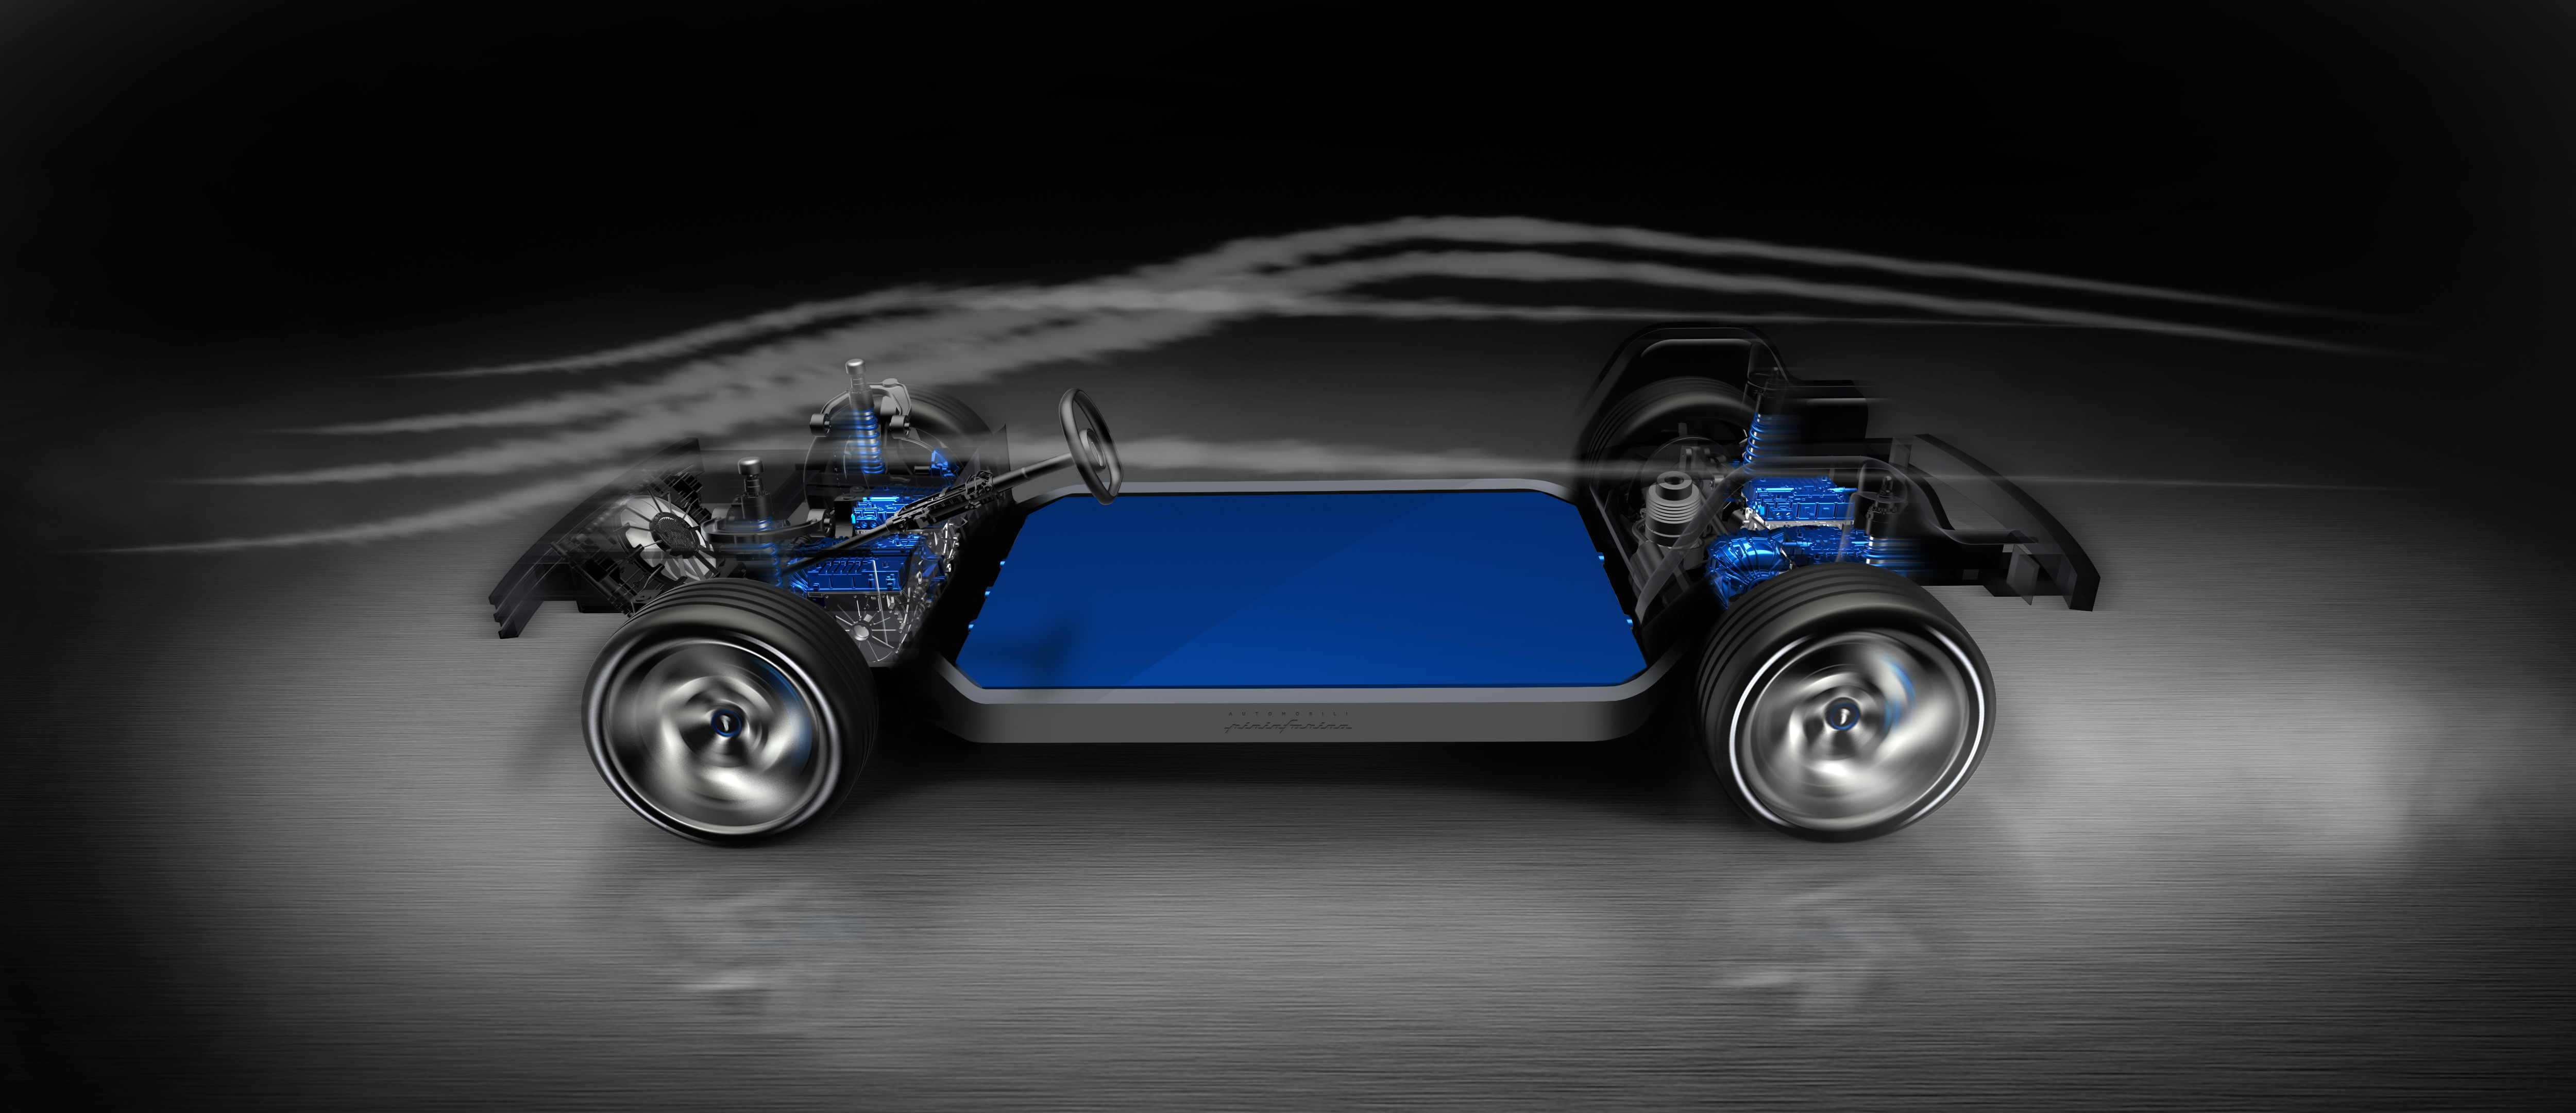 computer generated image of a chassis of a car